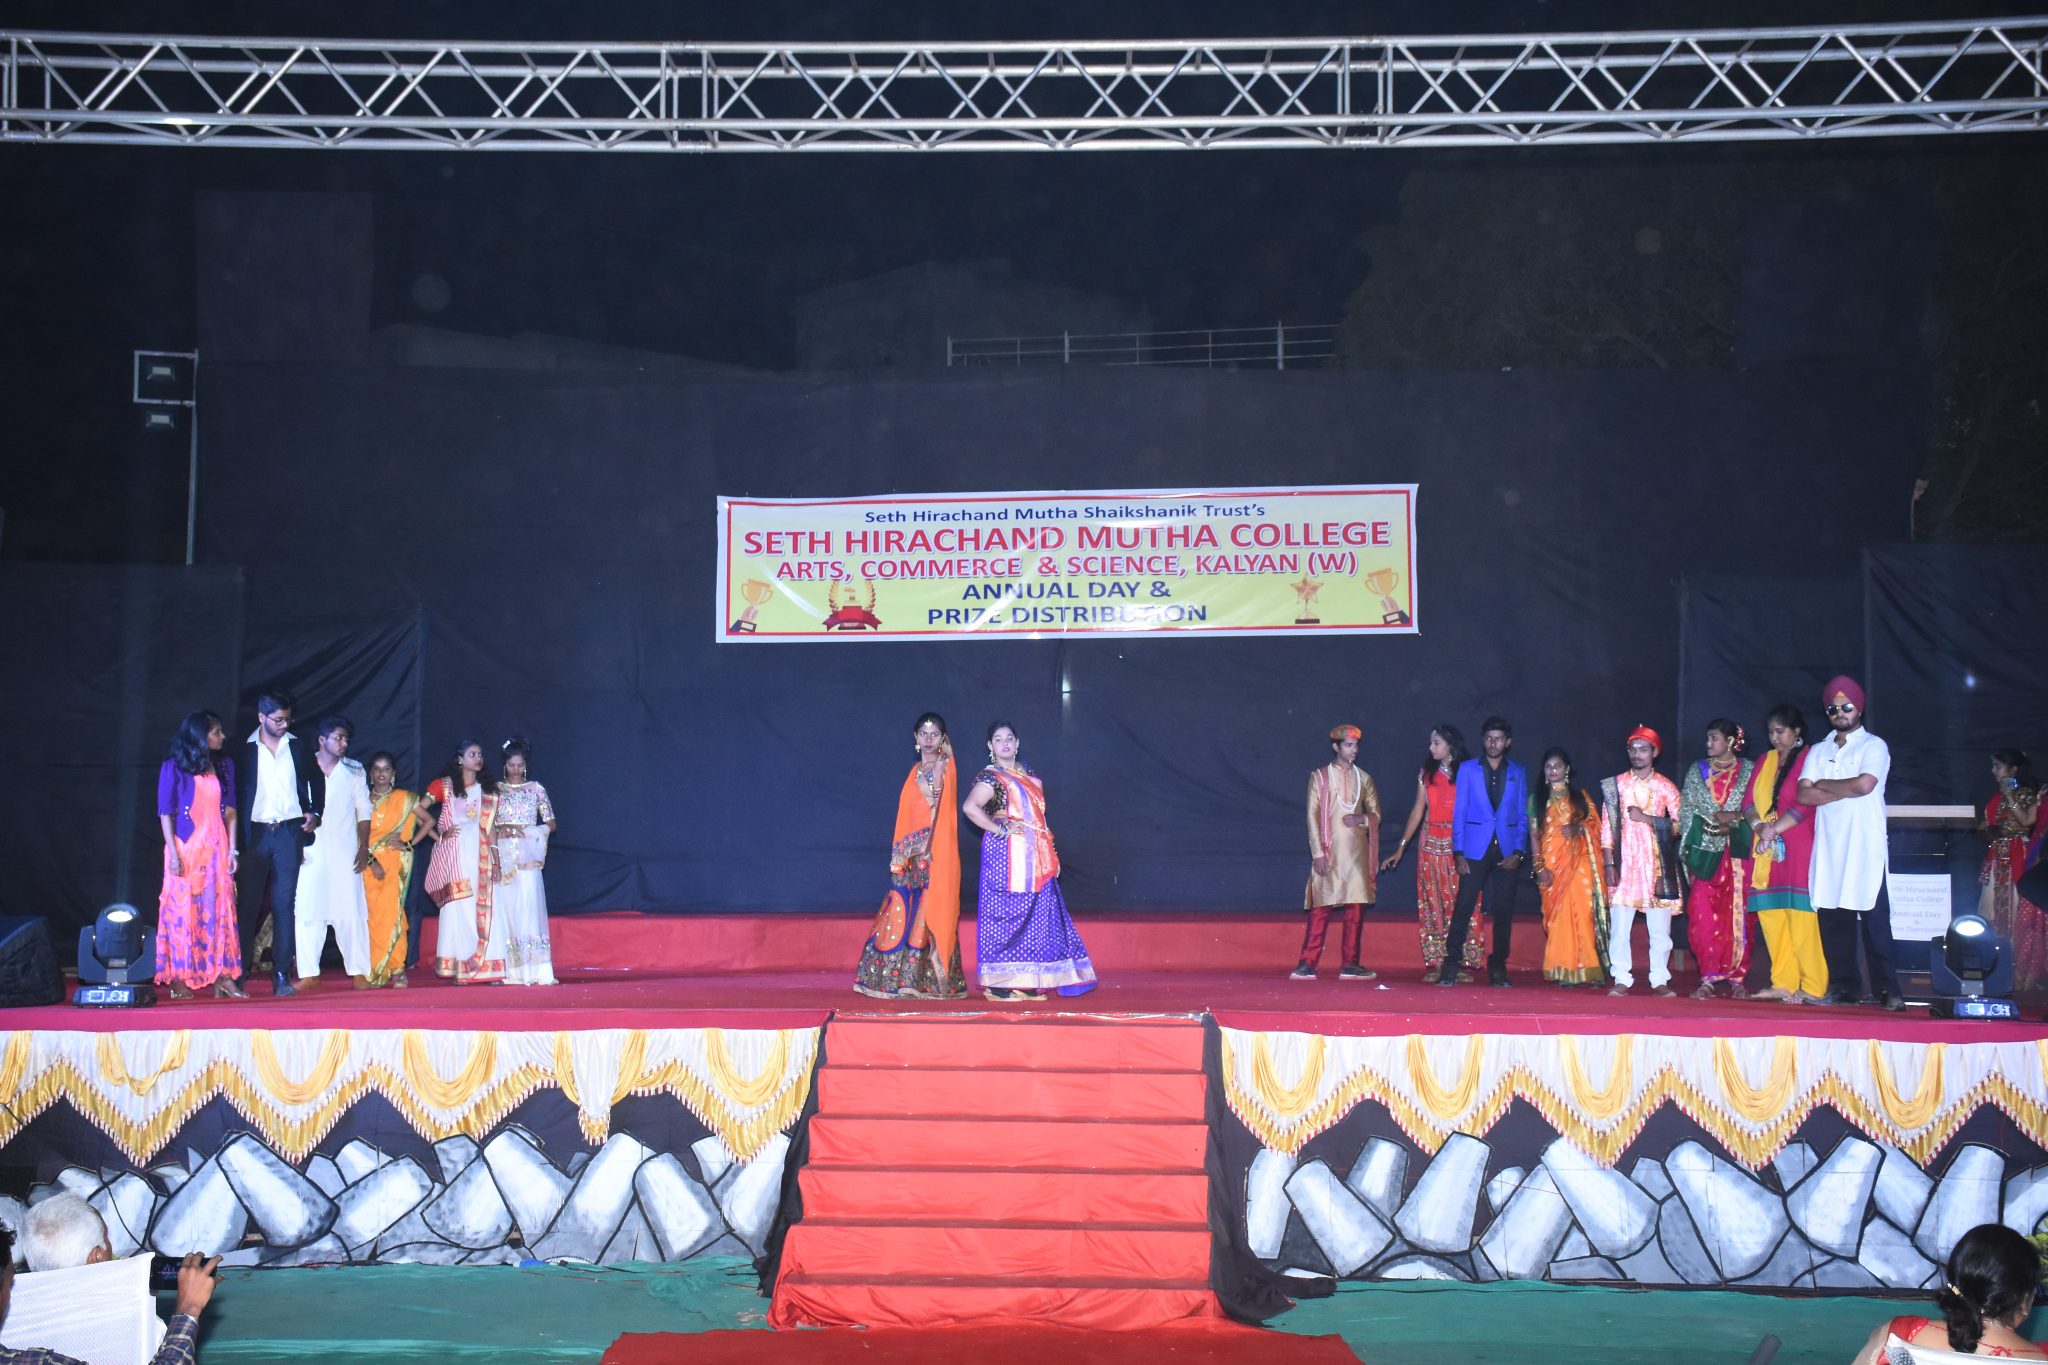 Annual Day & Prize distribution for the Academic year 2019-20 was celebrated on Sunday 22/12/2019.